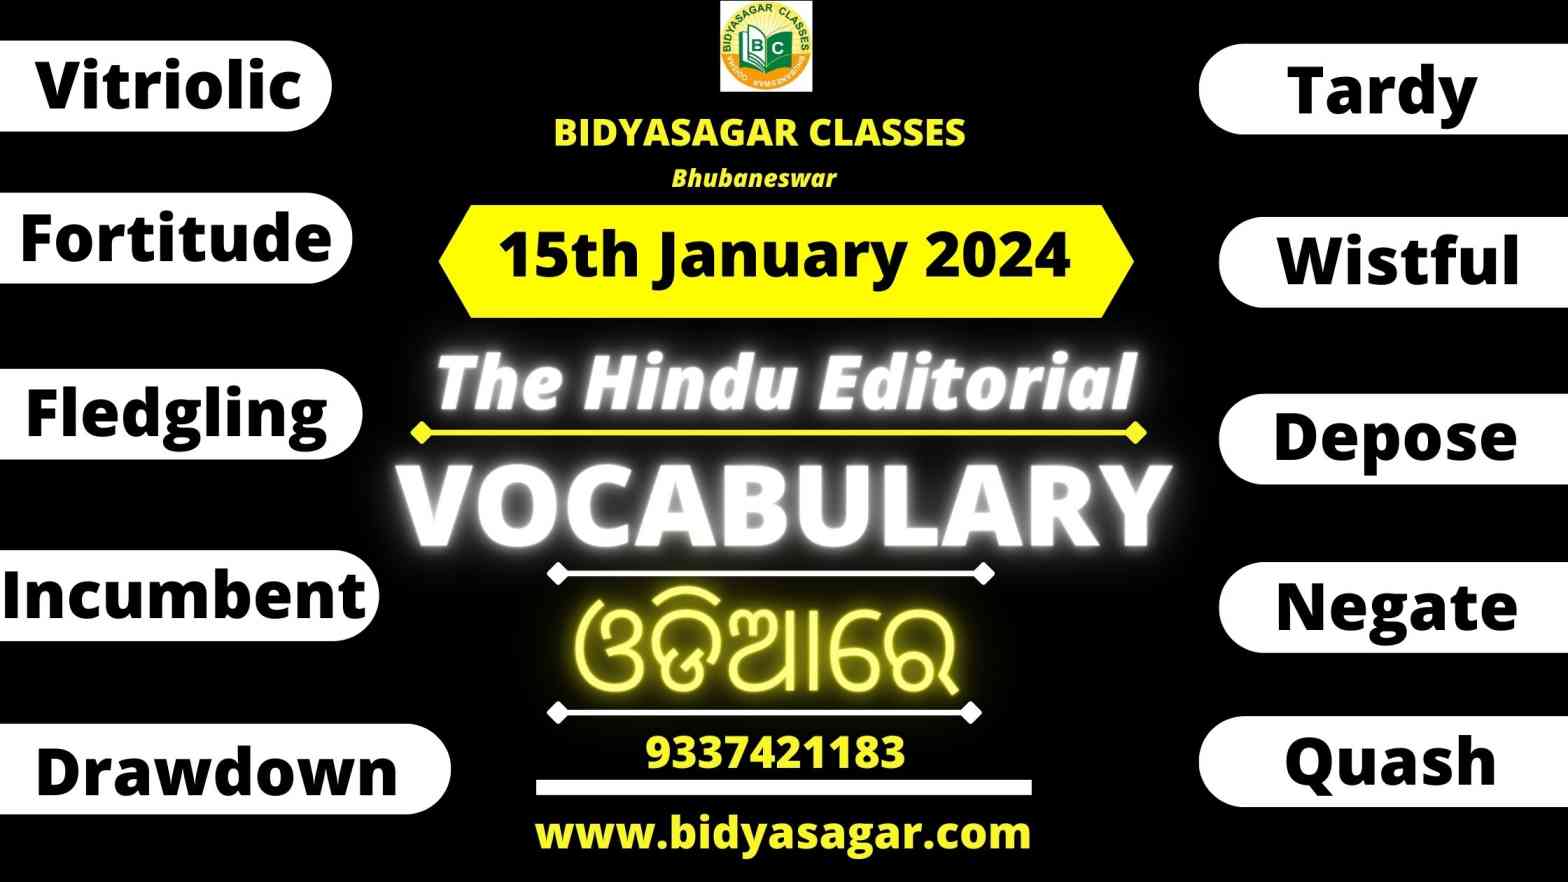 The Hindu Editorial Vocabulary of 15th January 2024